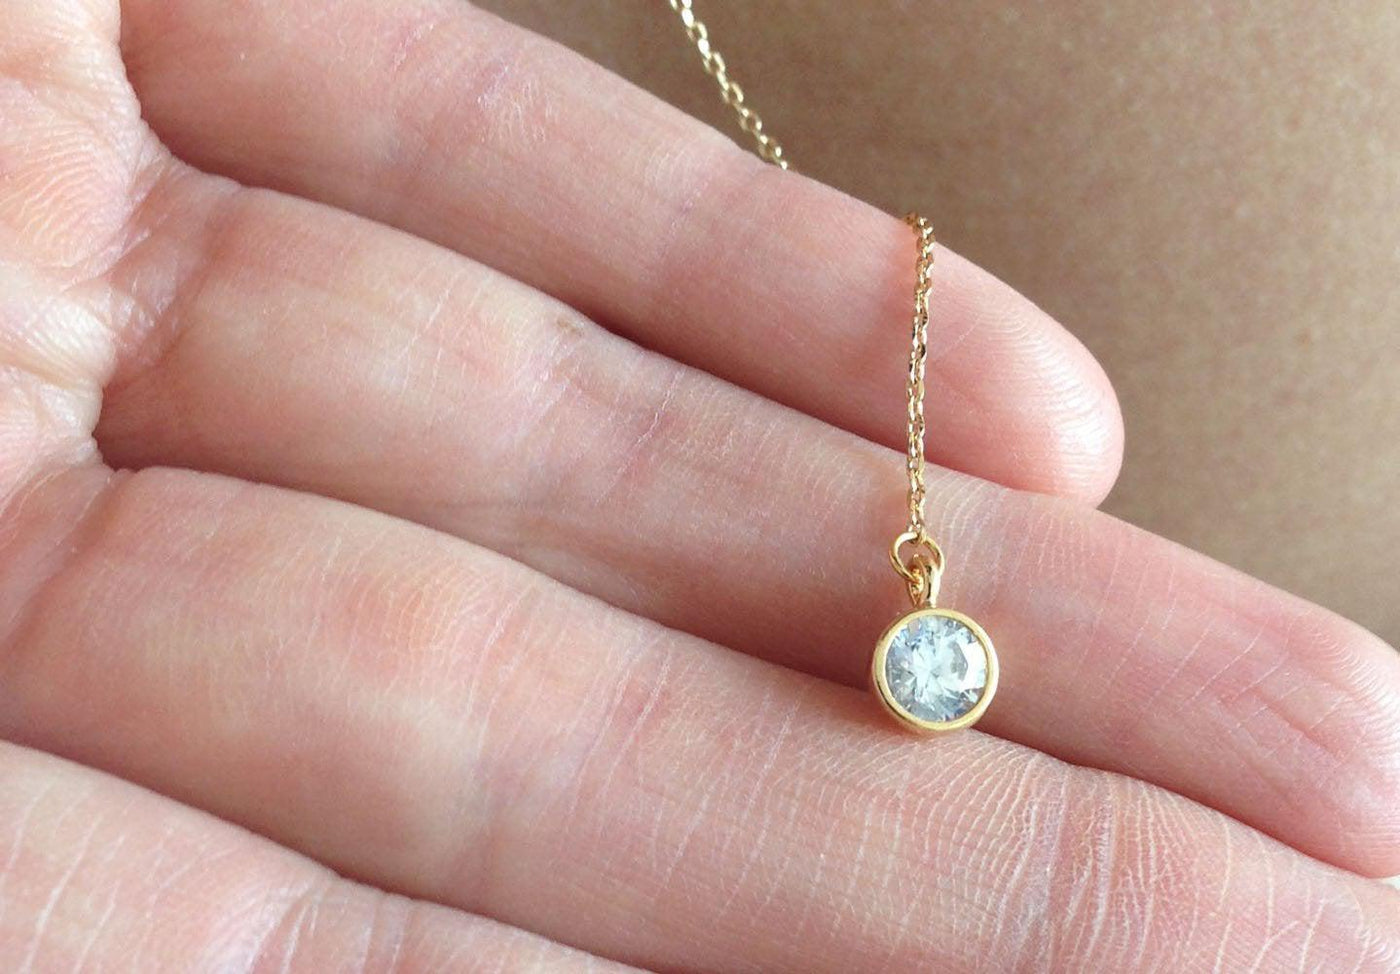 Gold body chain necklace with round white diamond drop